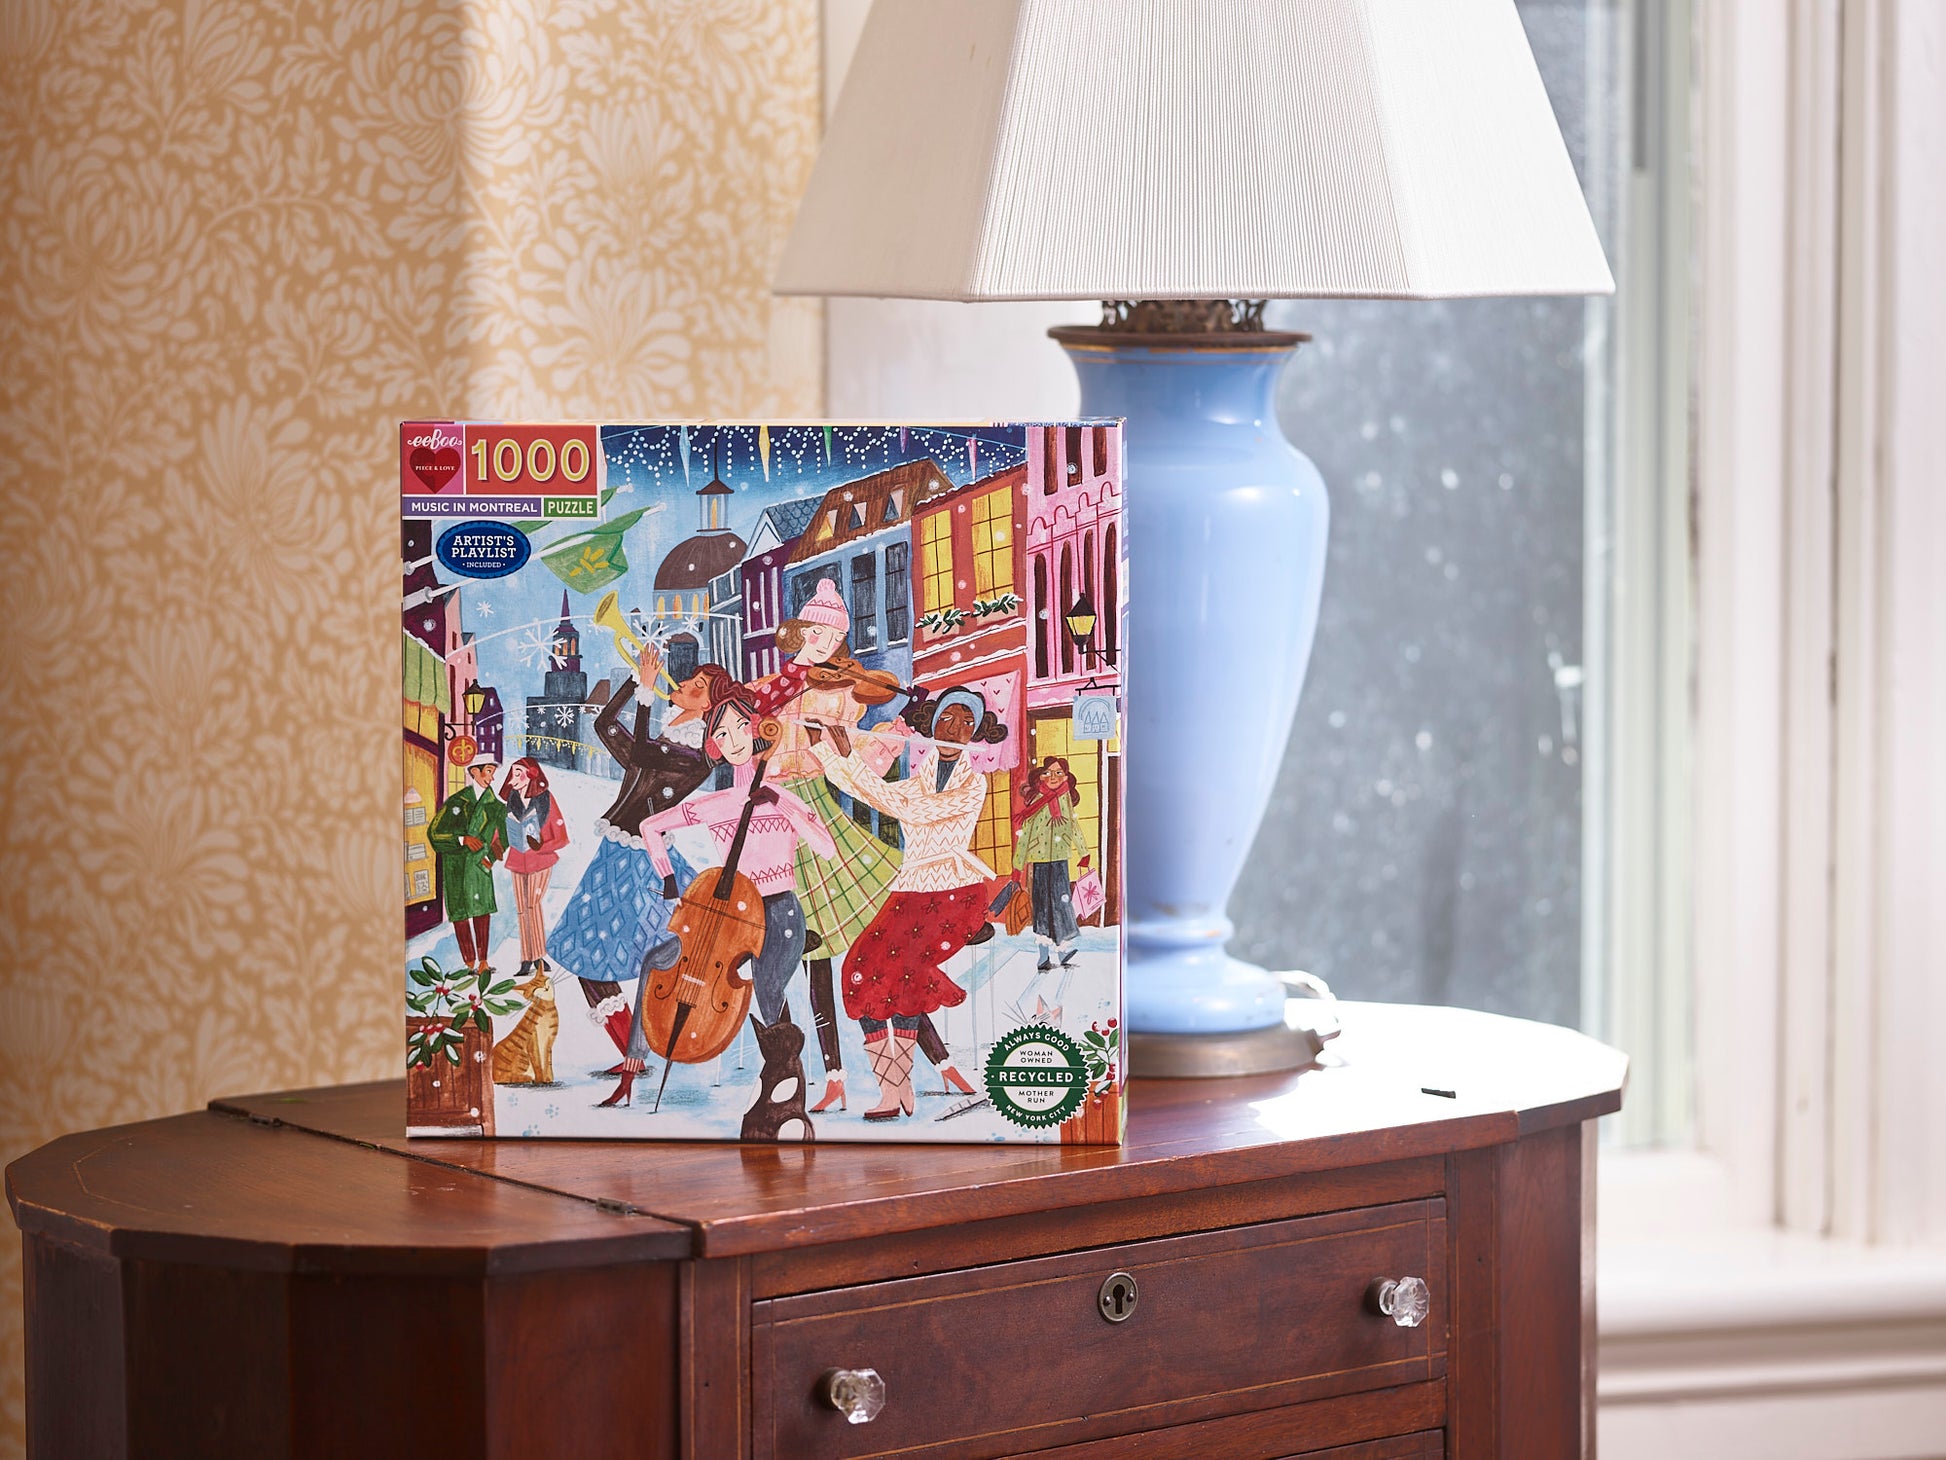 Music in Montreal Canada 1000 Piece Jigsaw Puzzle | eeBoo Piece & Love | Beautiful Gifts for Women